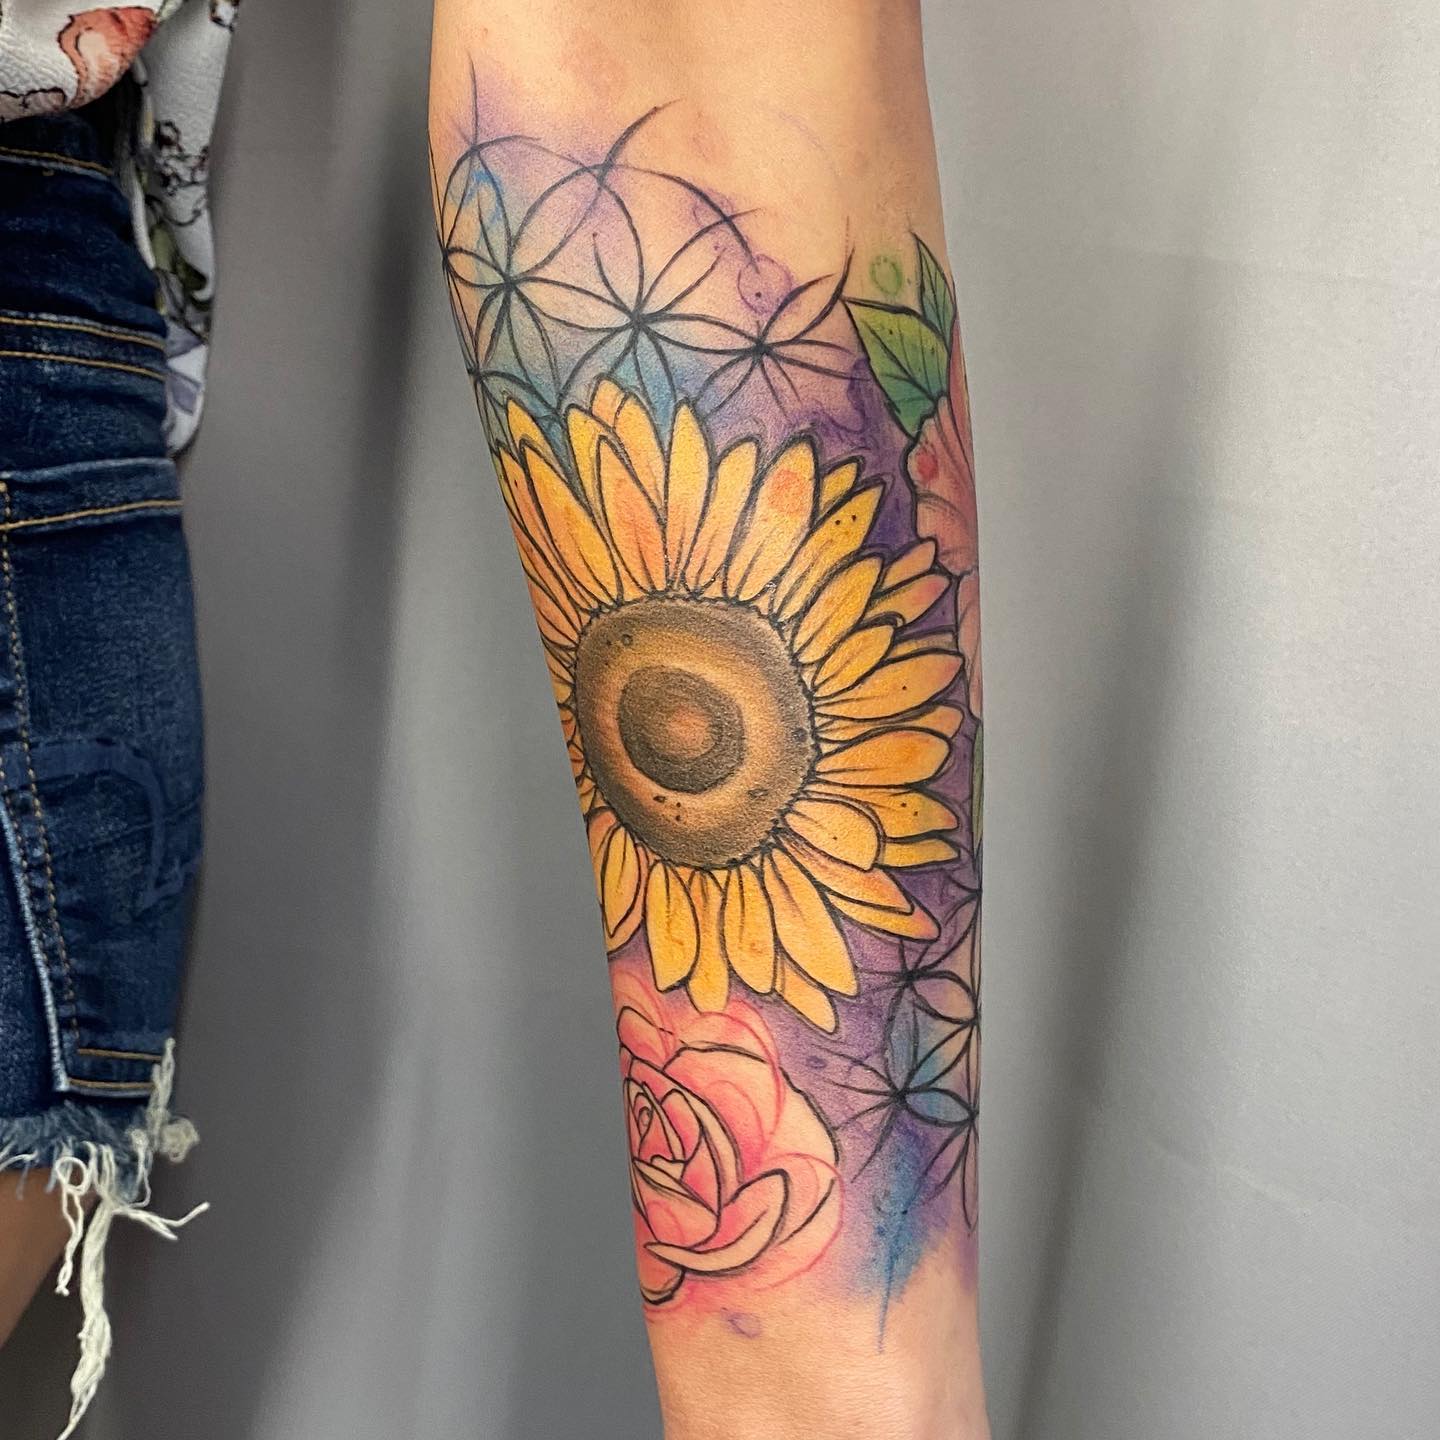 Watercolor sunflower tattoo by constan tina